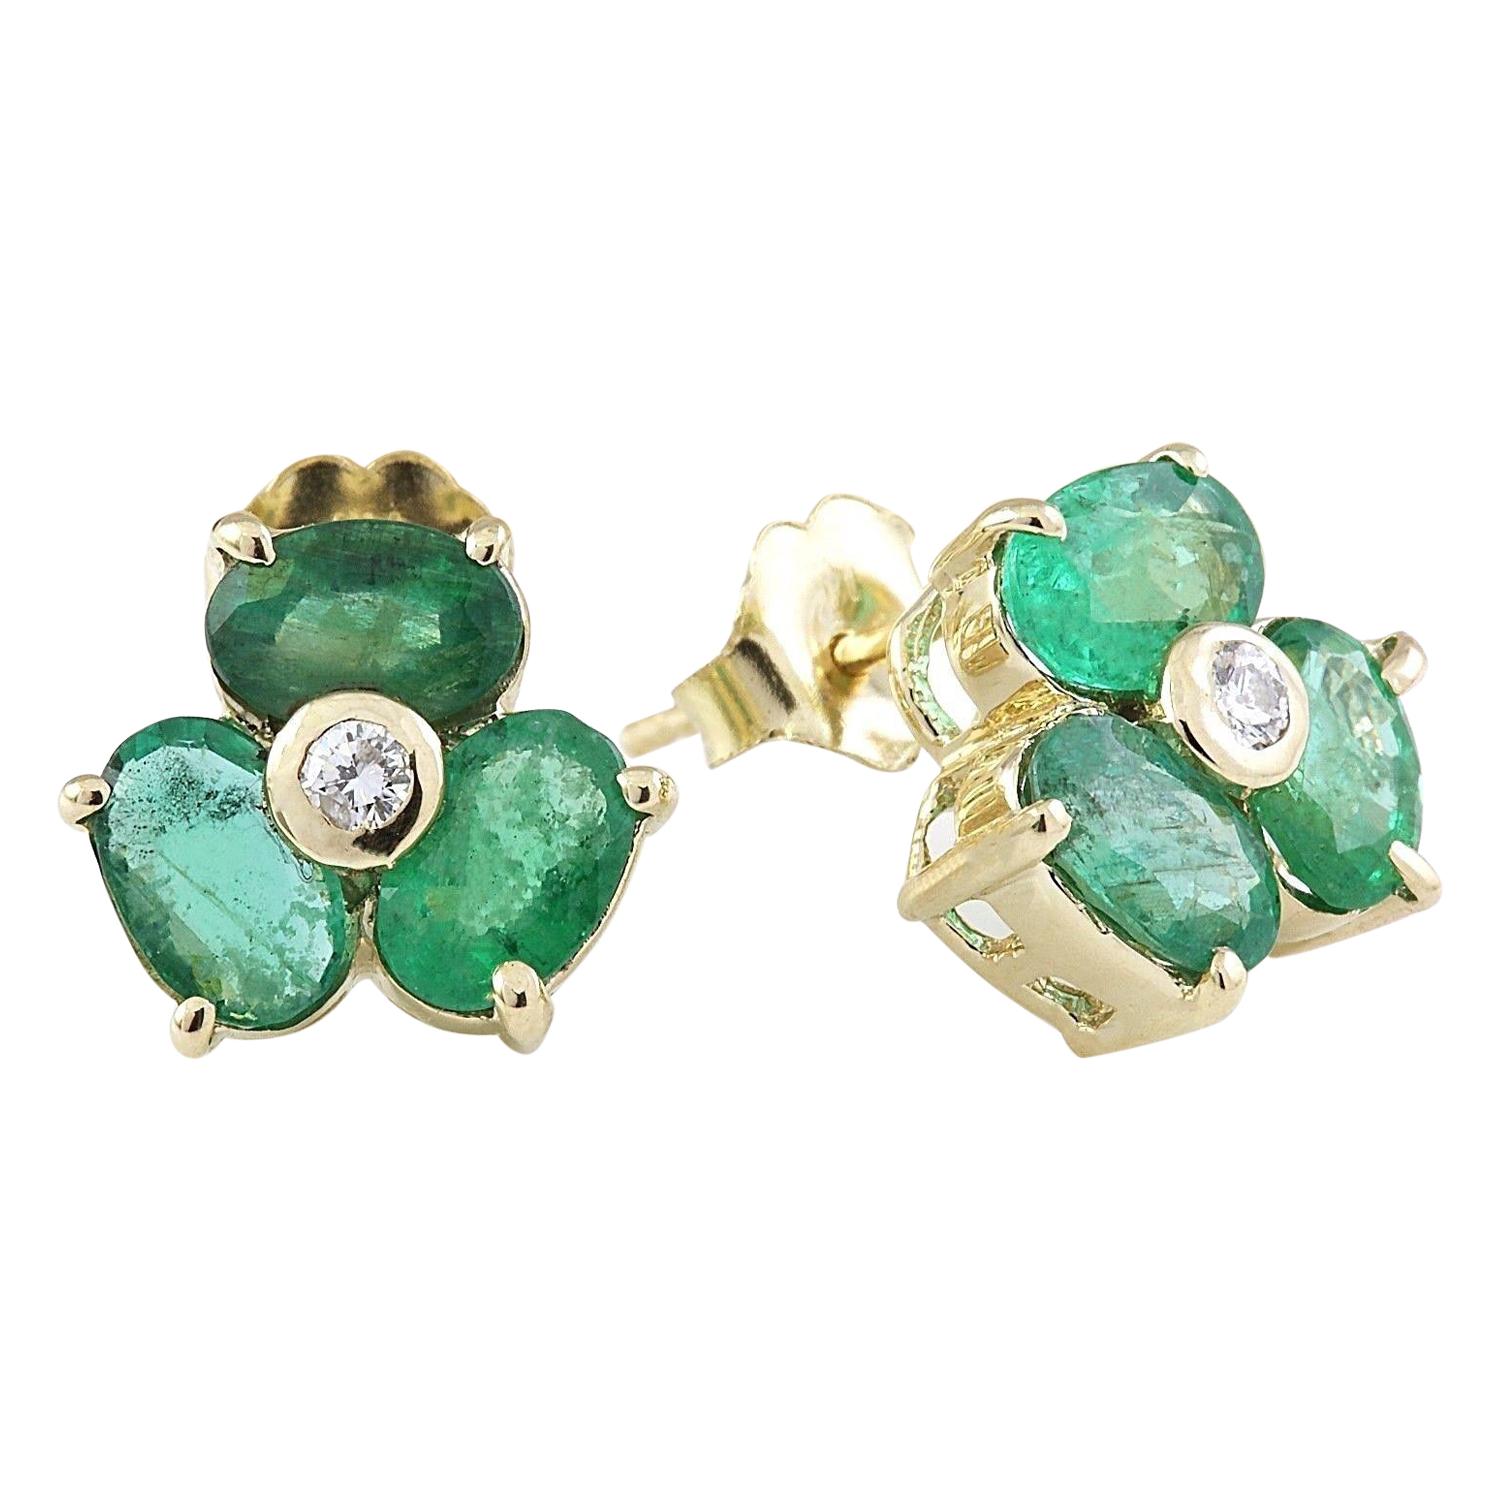 Discover elegance with our exquisite 14K Solid Yellow Gold Diamond Stud Earrings, featuring captivating Natural Emerald gemstones. The mainstones are dazzling 2.80 Carat Emeralds, each measuring 6.00x4.00 mm, exuding a rich green hue. Adorned with